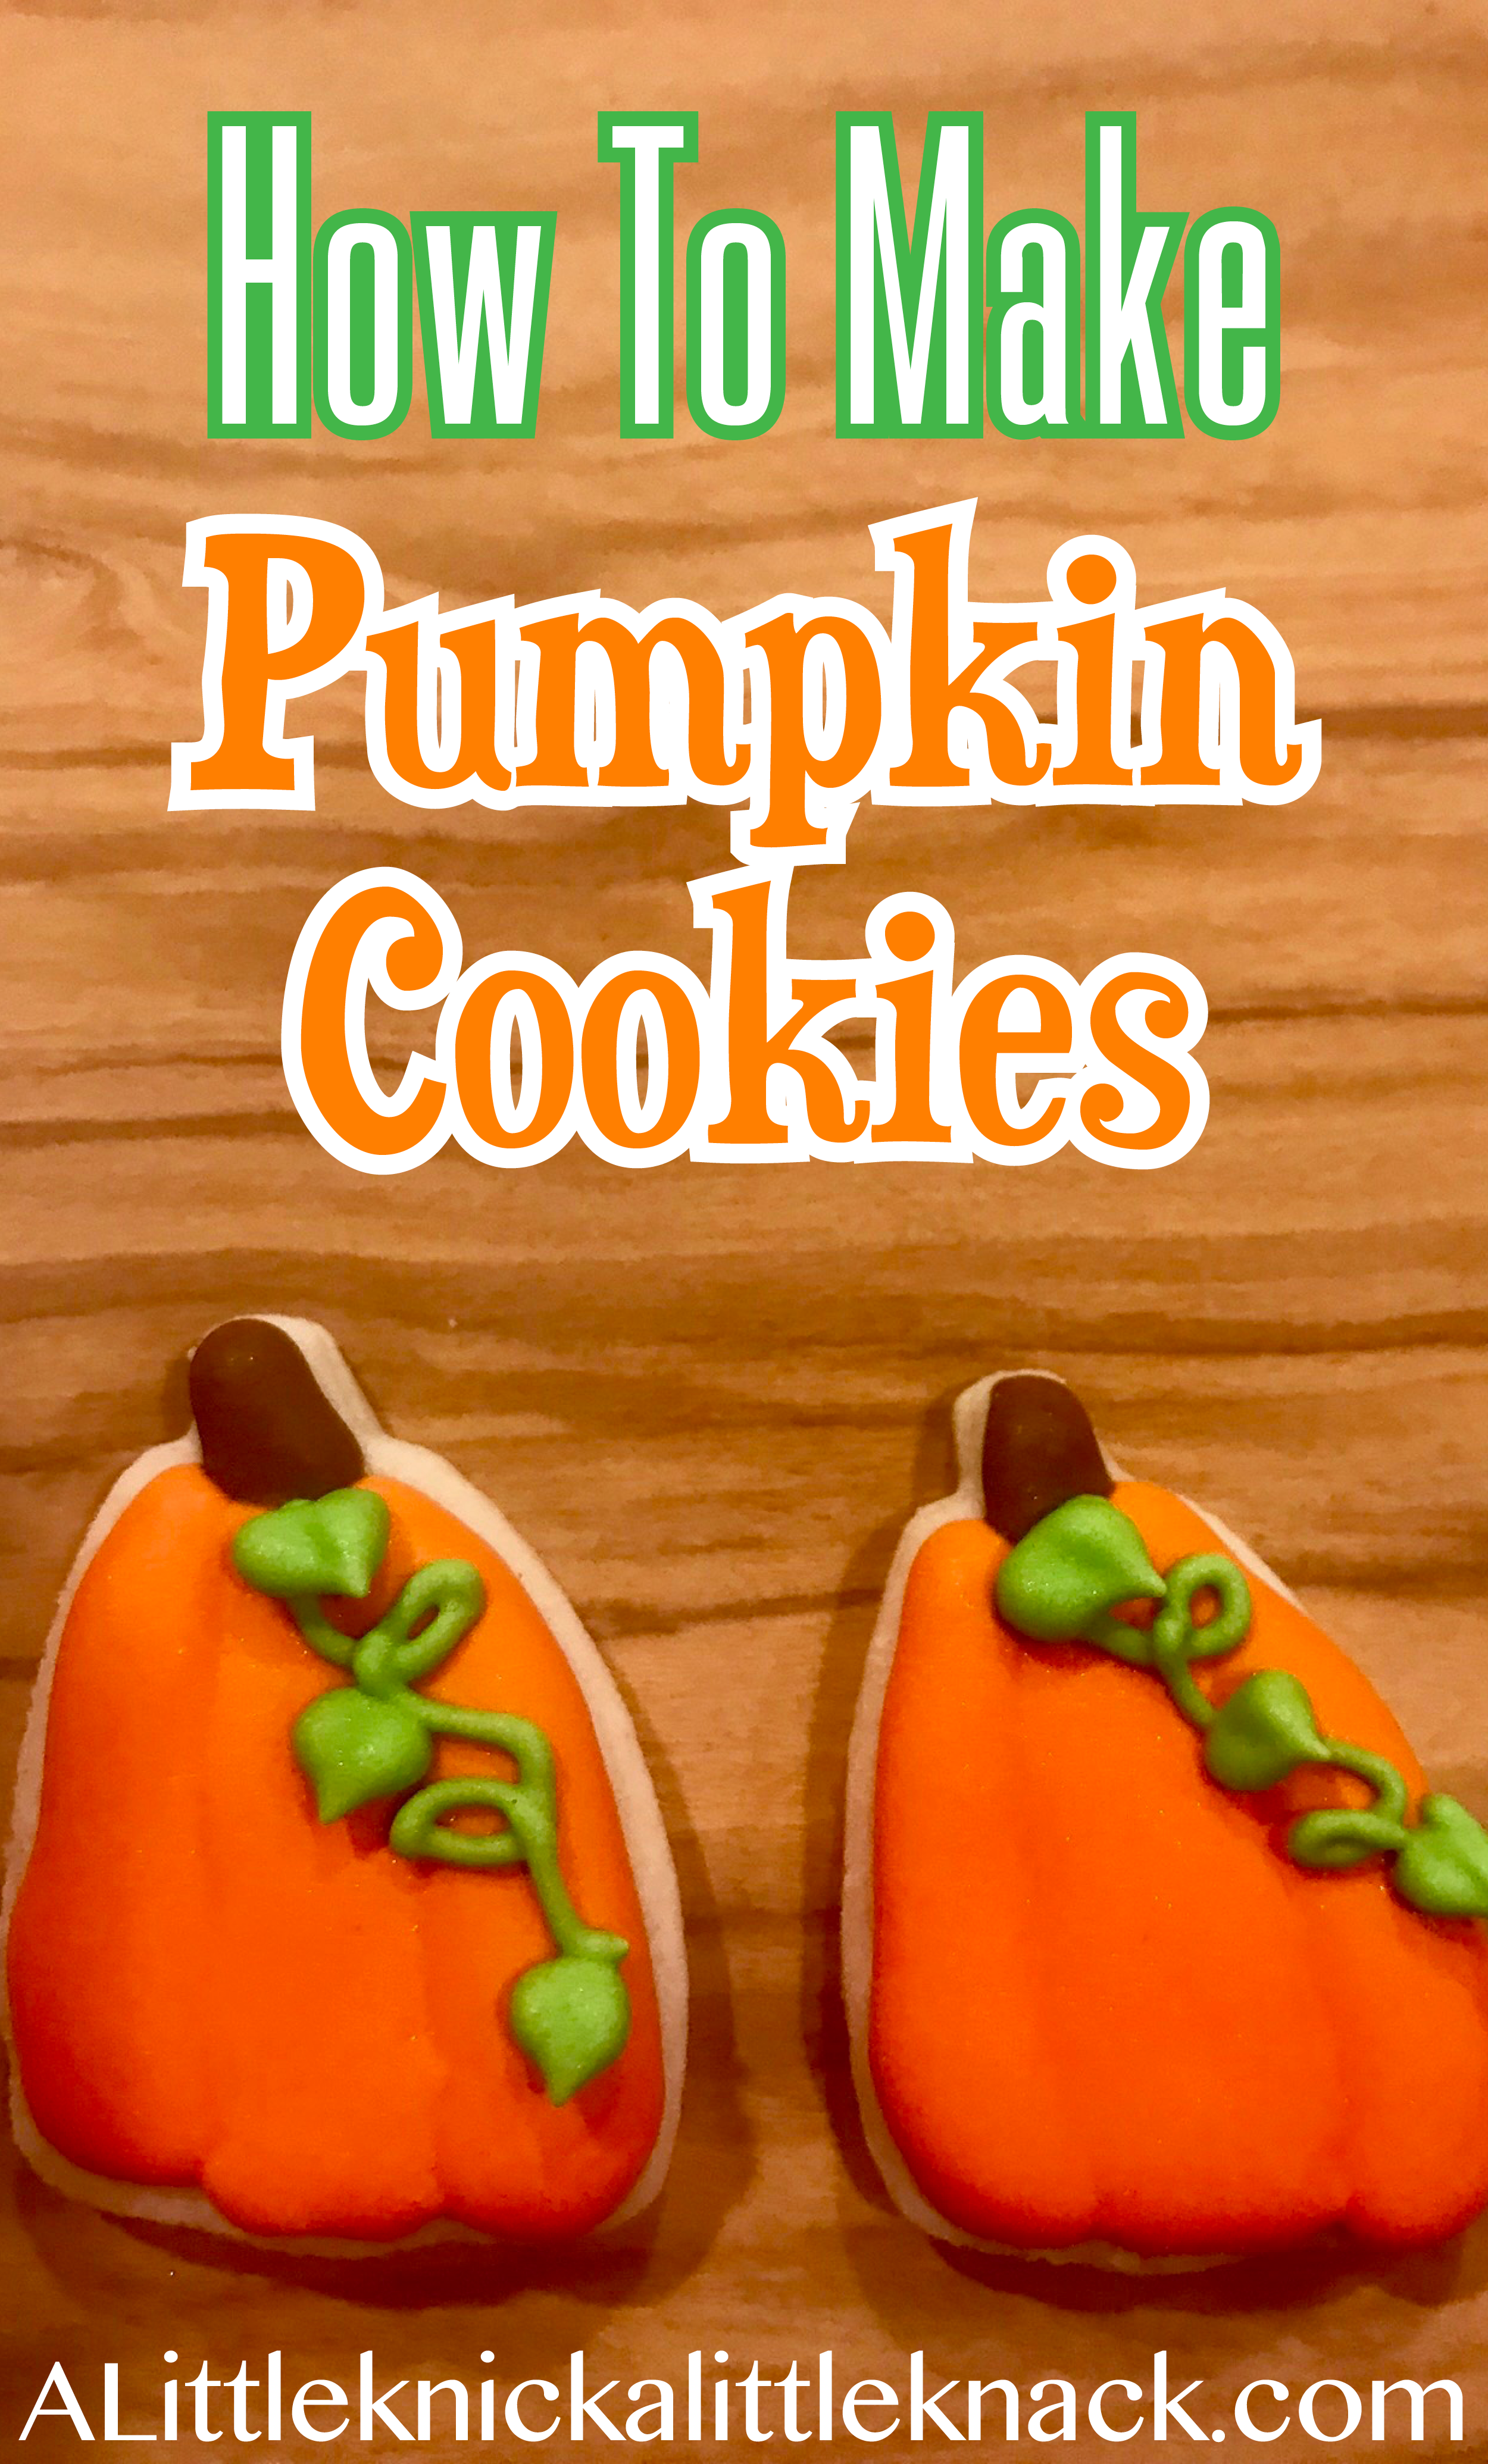 Impress the in-laws with these gorgeous pumpkin cookies, a perfect thanksgiving treat #thanksgiving